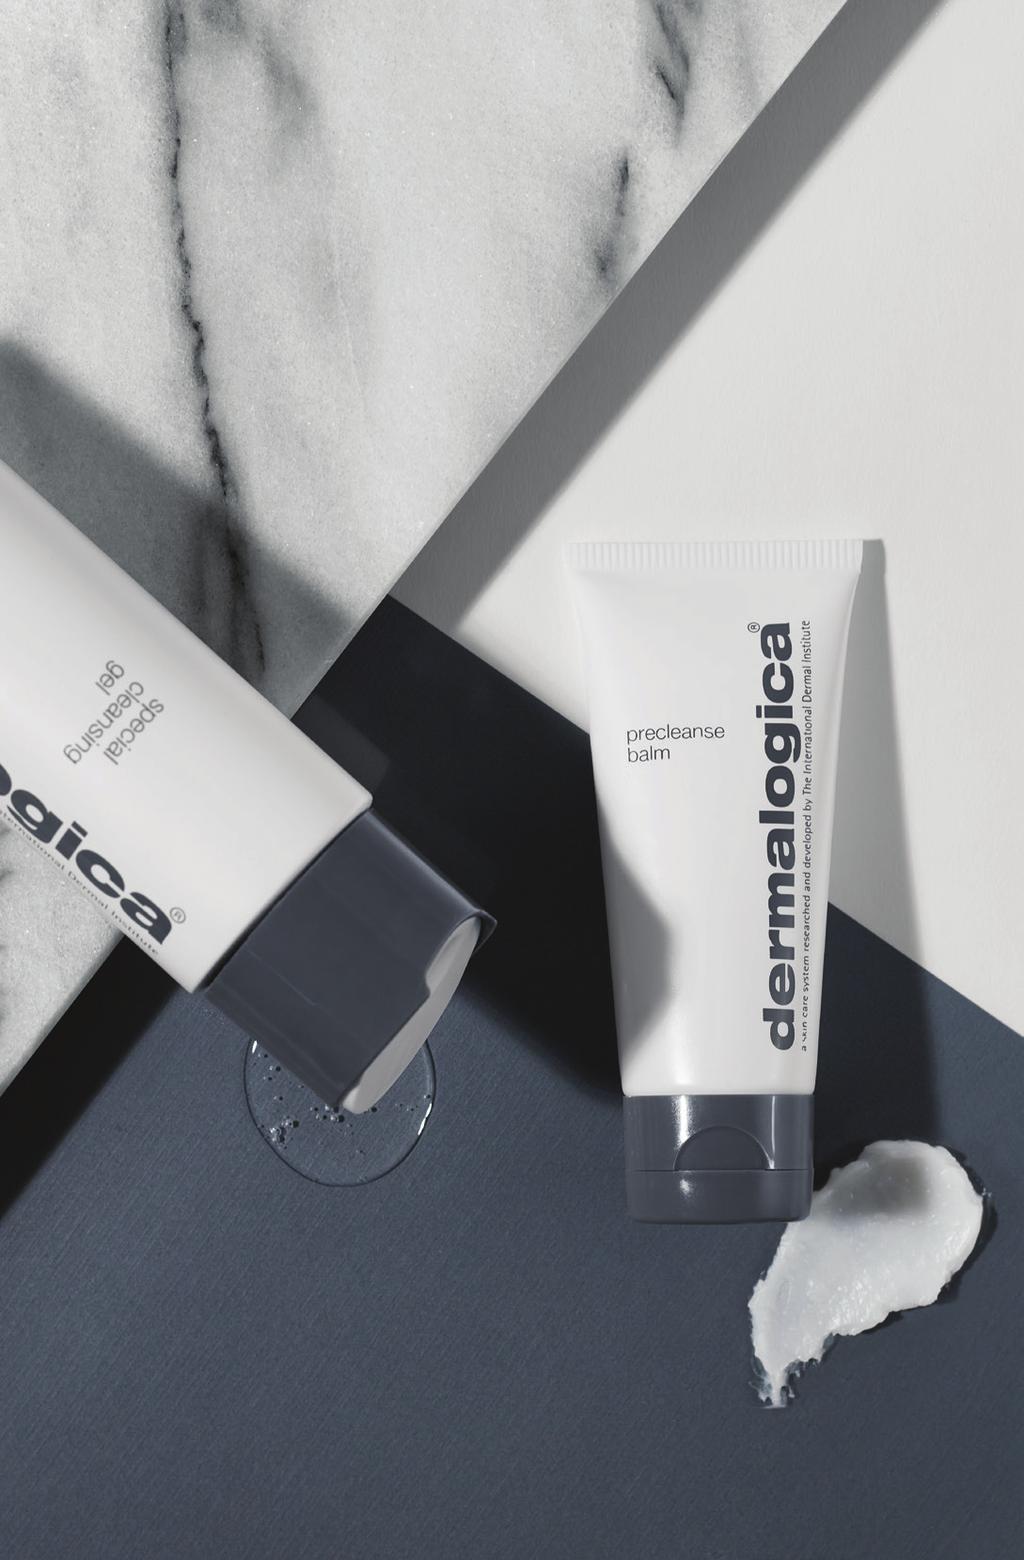 more than just great products Here s an overview of the exclusive benefits and incentives you are automatically eligible for as a Dermalogica account!